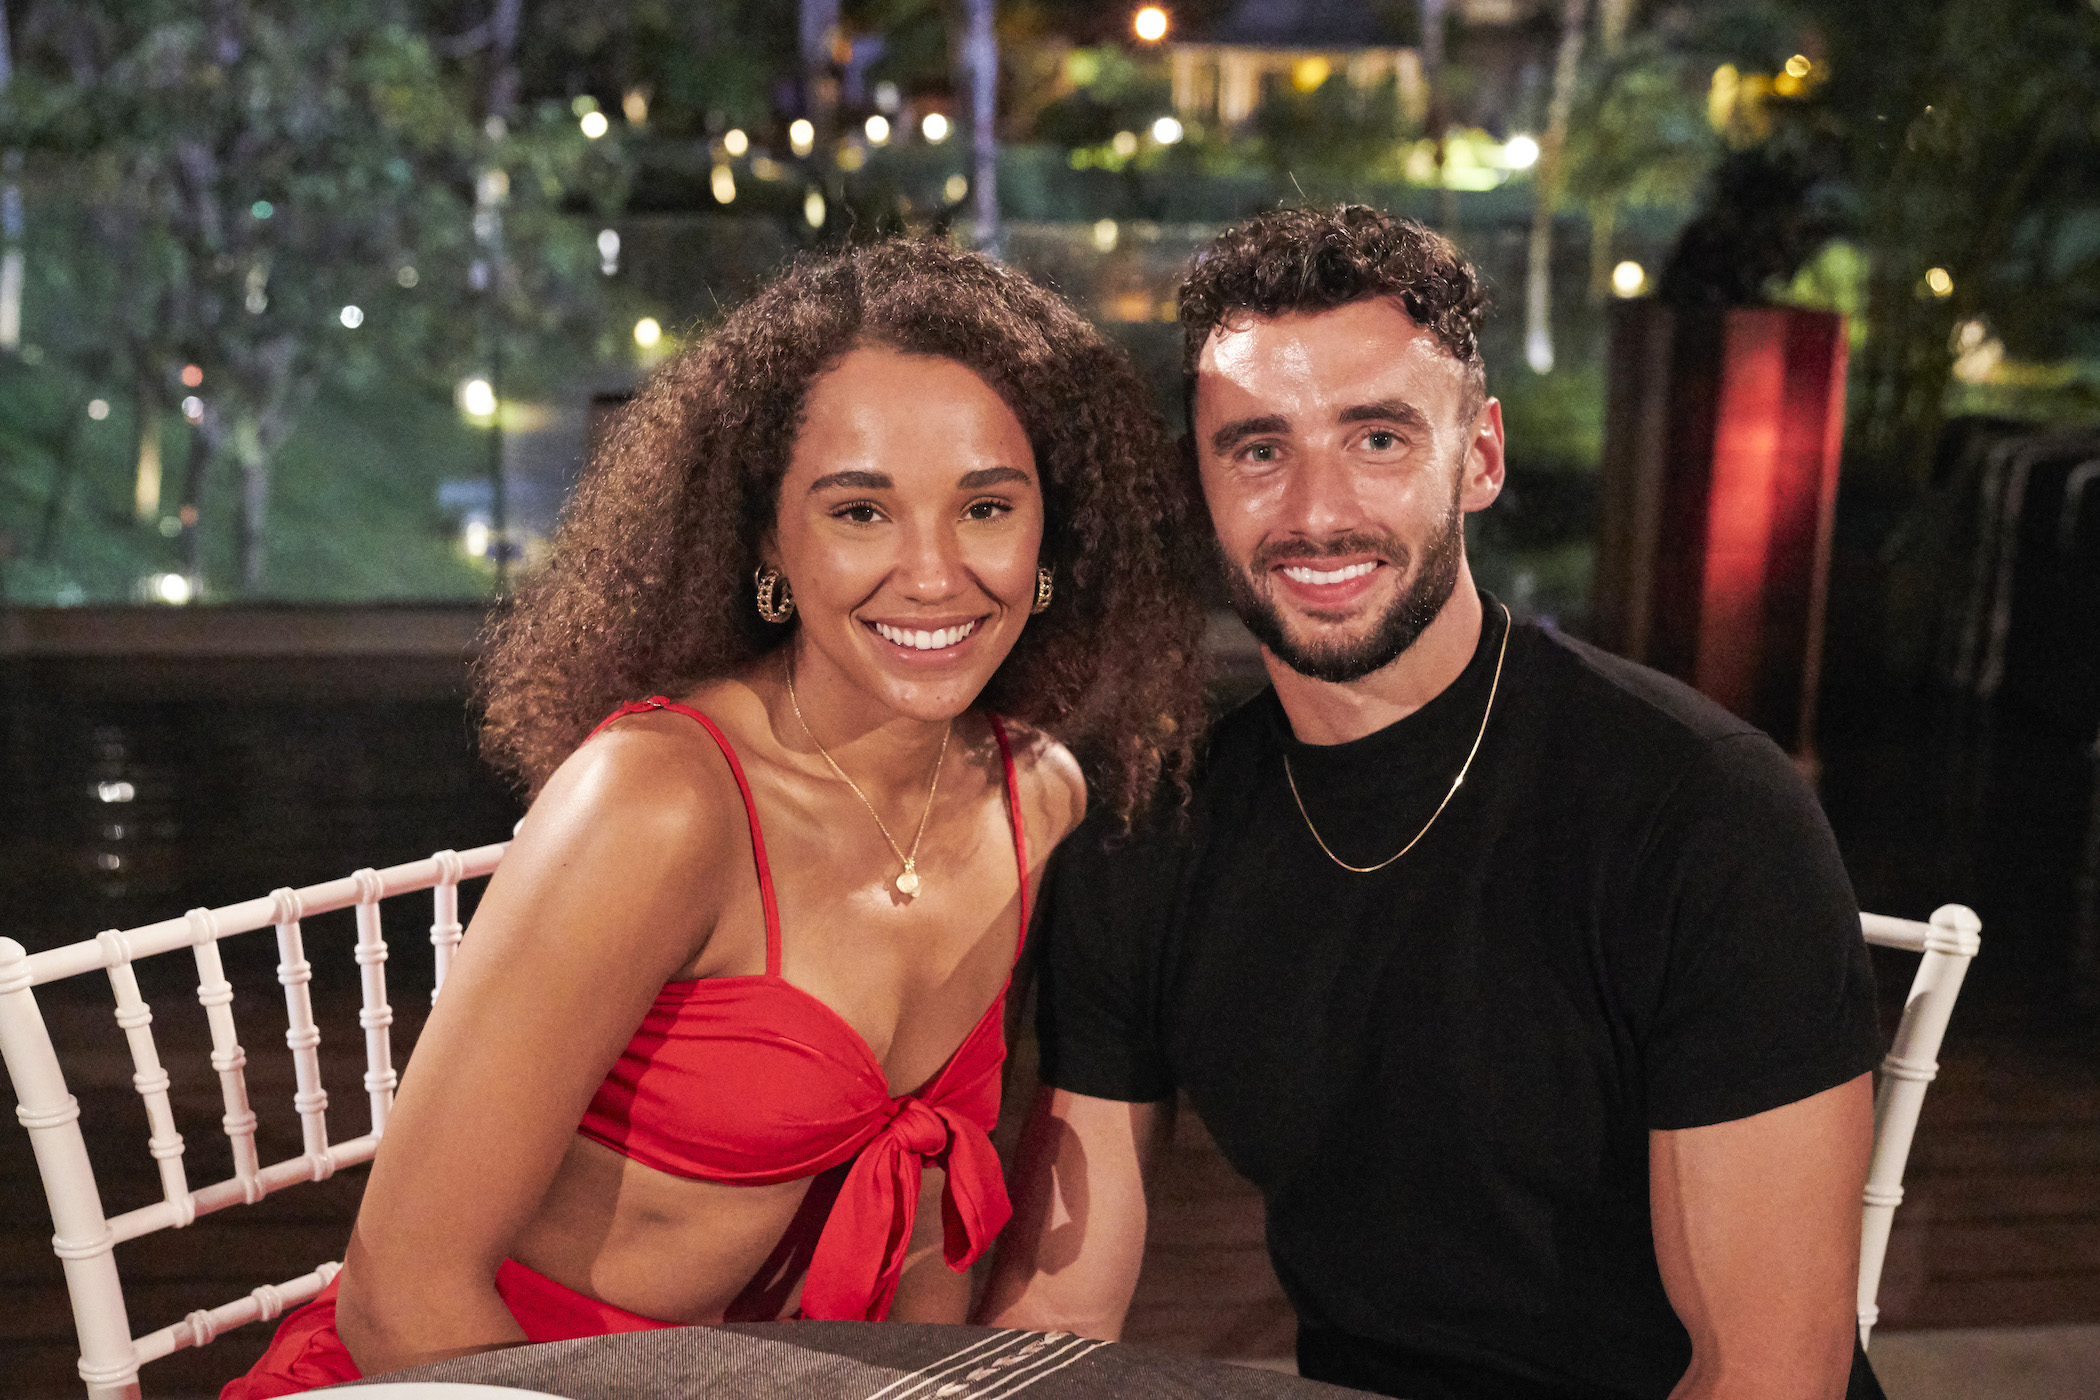 Pieper James and Brendan Morais sitting together and smiling on 'Bachelor in Paradise'